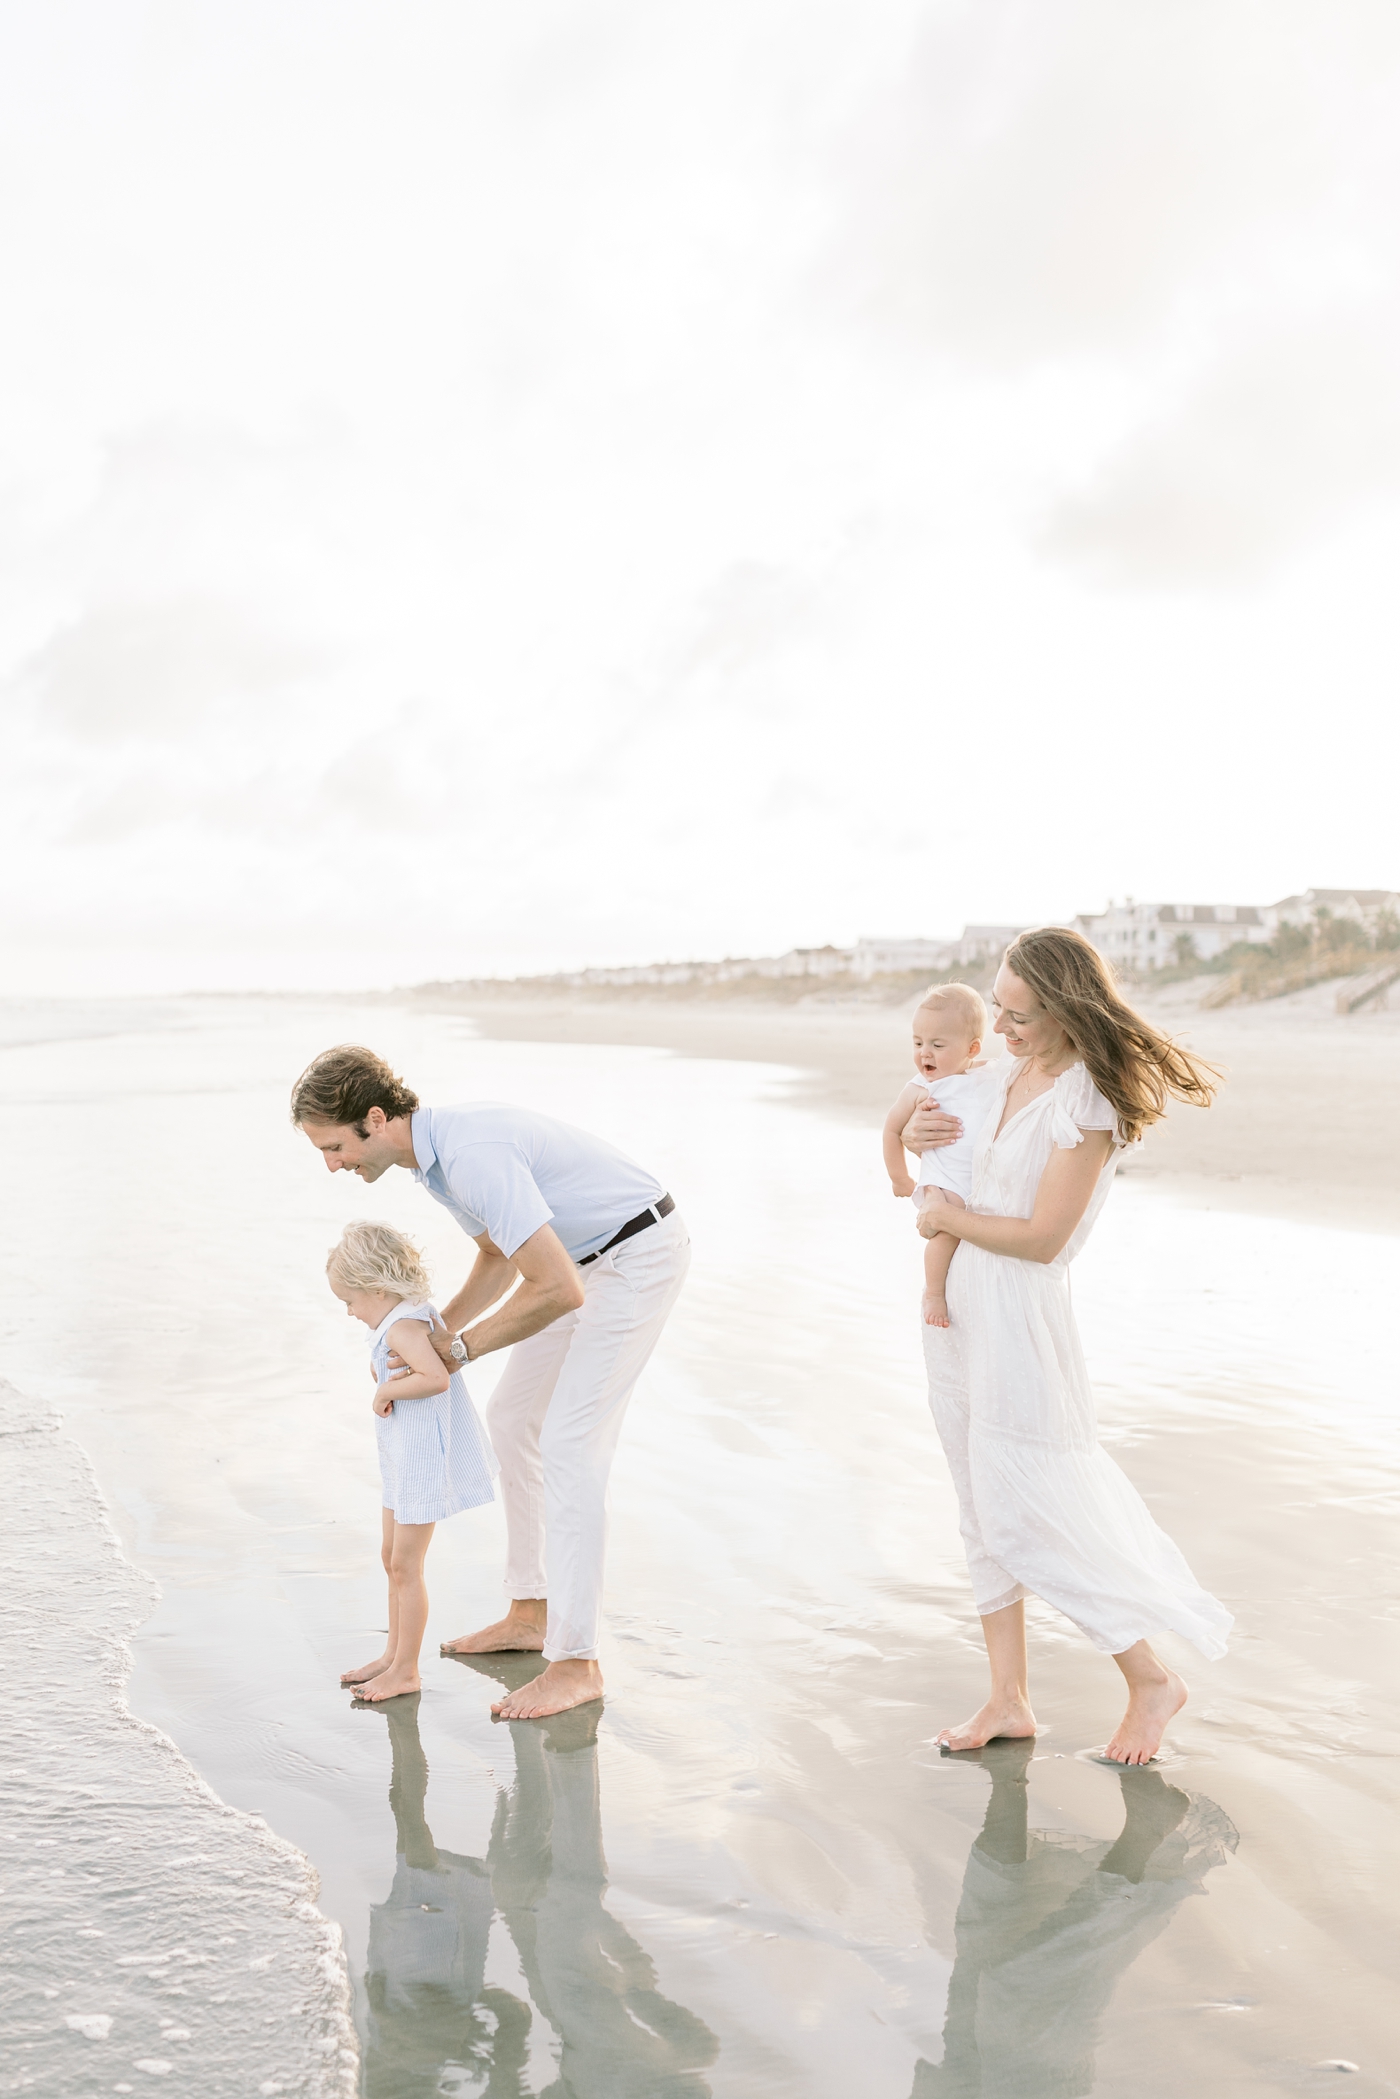 Family playing on the beach | Photo by Caitlyn Motycka Photography.